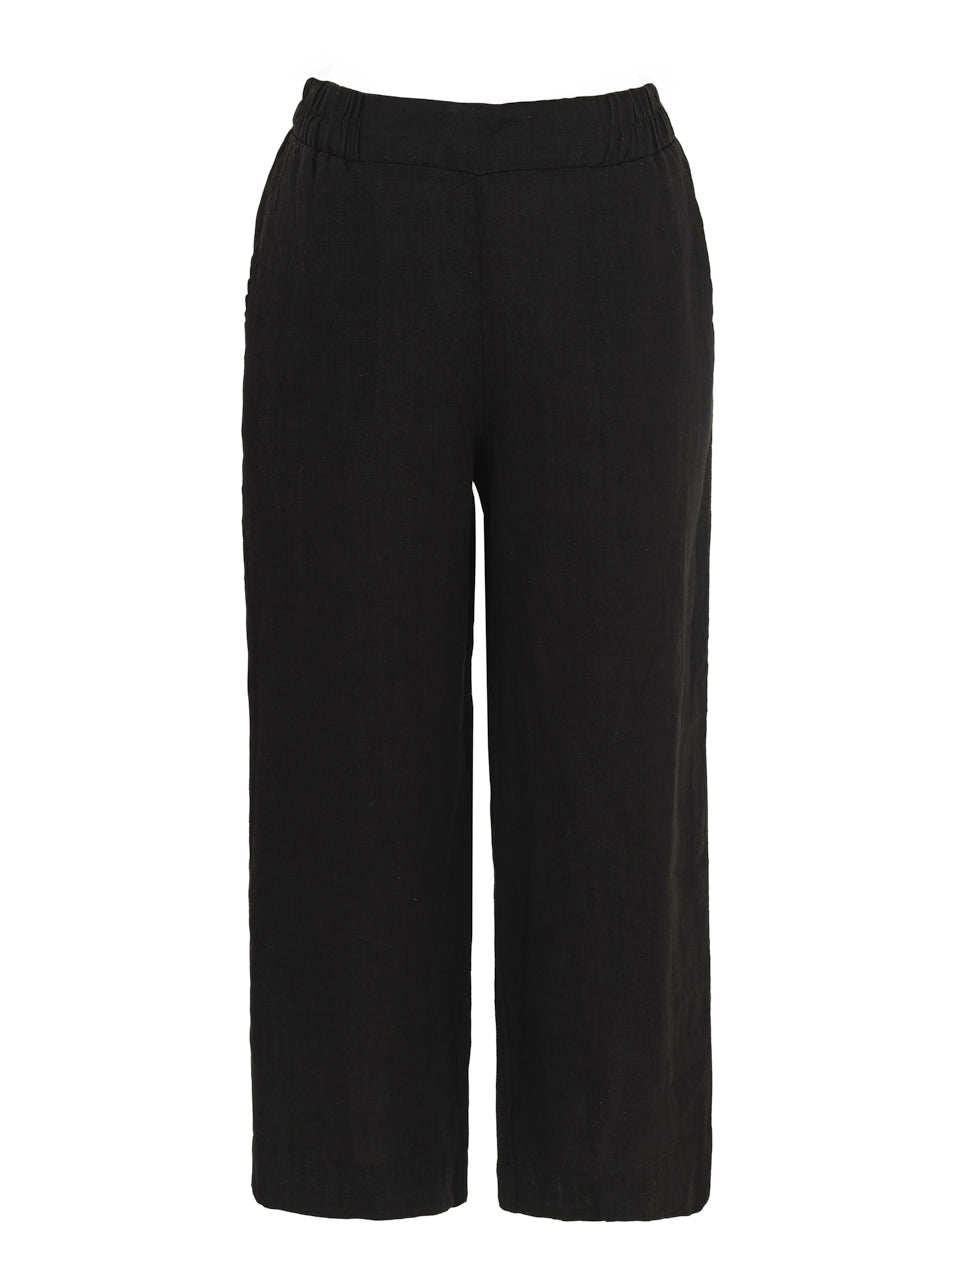 Dolcezza Pant - Style 24253